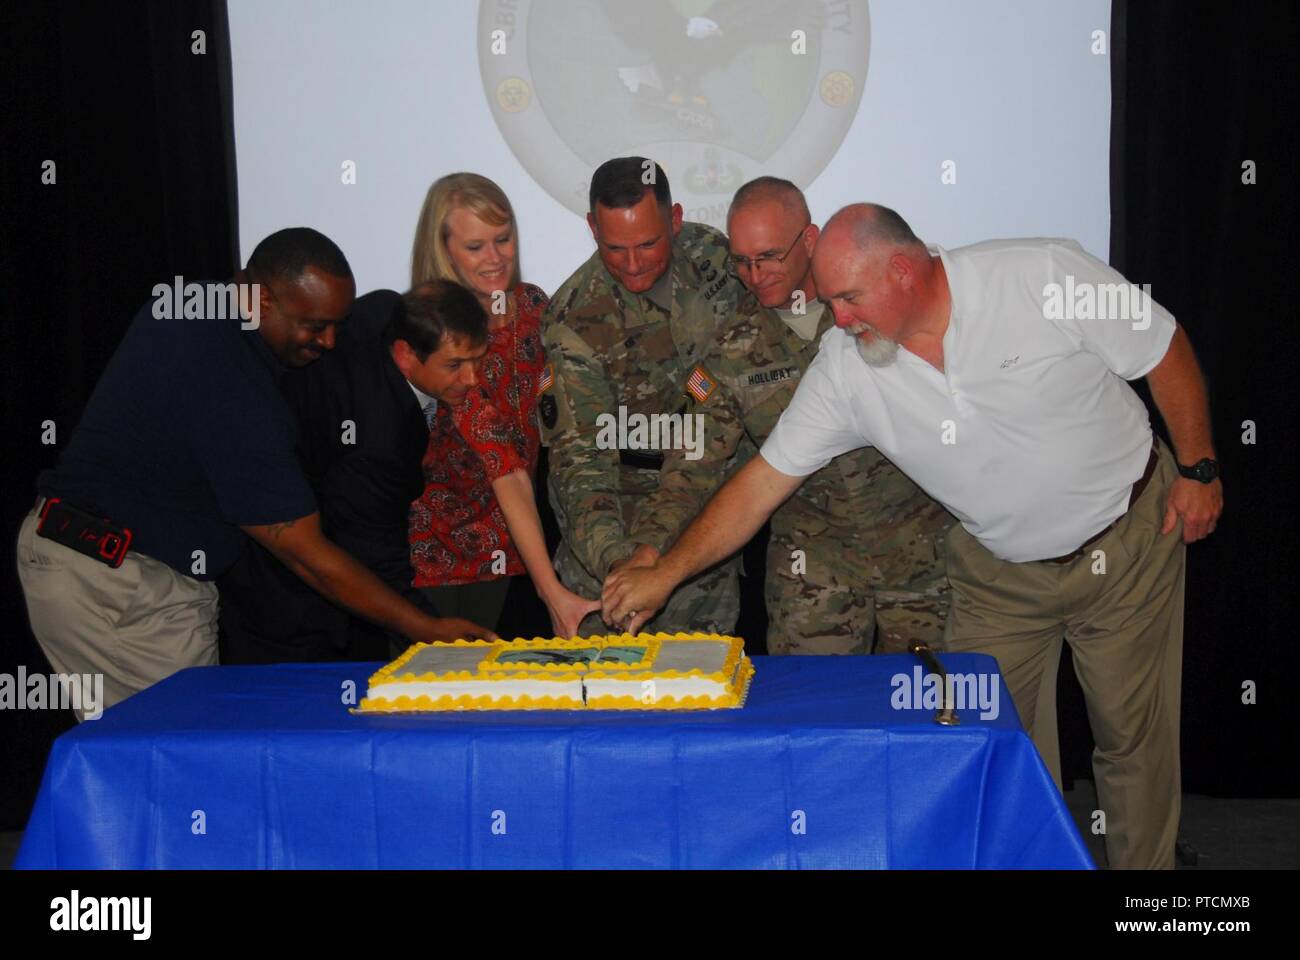 Brig. Gen. William E. King IV (center), commanding general of the 20th CBRNE Command from Aberdeen Proving Ground, Maryland, and Col. Thomas Holliday, Redstone Arsenal garrison commander, join special guests on July 10 to cut the cake that signifies the mission-ready status for the CARA-West team. This 37-member, highly specialized team completed a move this spring from Pinebluff Arsenal, Arkansas, to Redstone Arsenal next to Huntsville, Alabama. (20th CBRNE Command Stock Photo